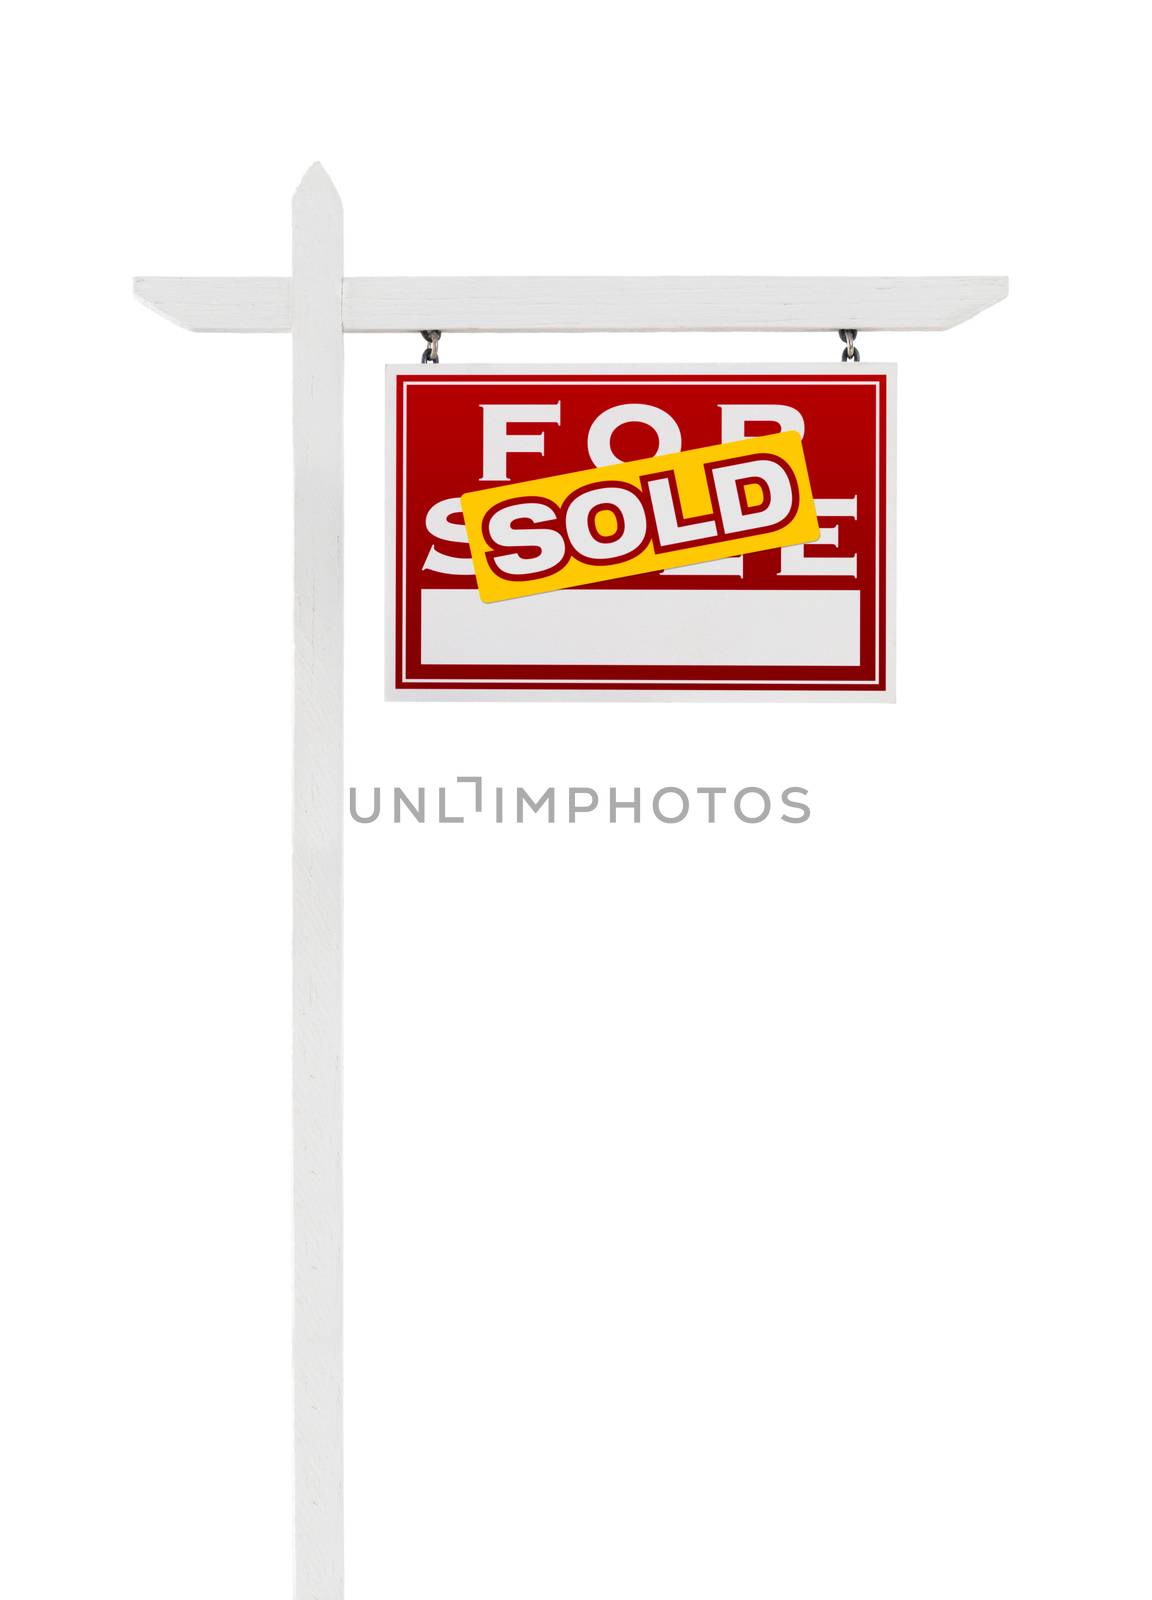 Right Facing Sold For Sale Real Estate Sign Isolated on a White  by Feverpitched